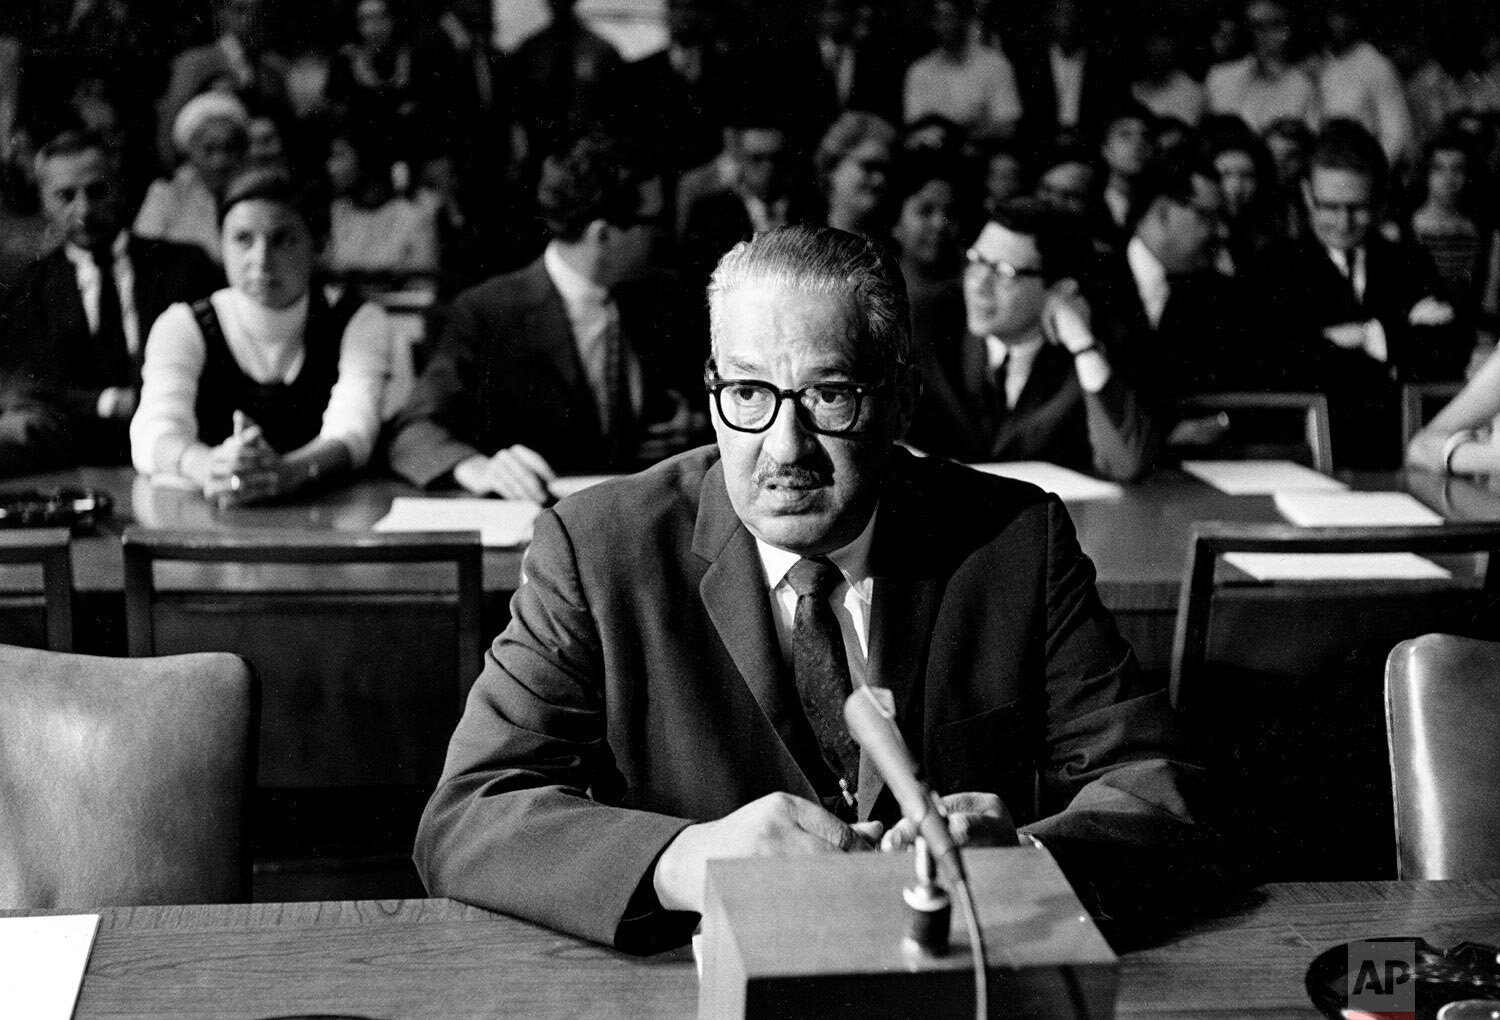  Solicitor General Thurgood Marshall, nominated by President Lyndon B. Johnson to the U.S. Supreme Court, sits at the witness table before testifying on his fitness for the post before the Senate Judiciary Committee, in Washington, July 18, 1967. (AP